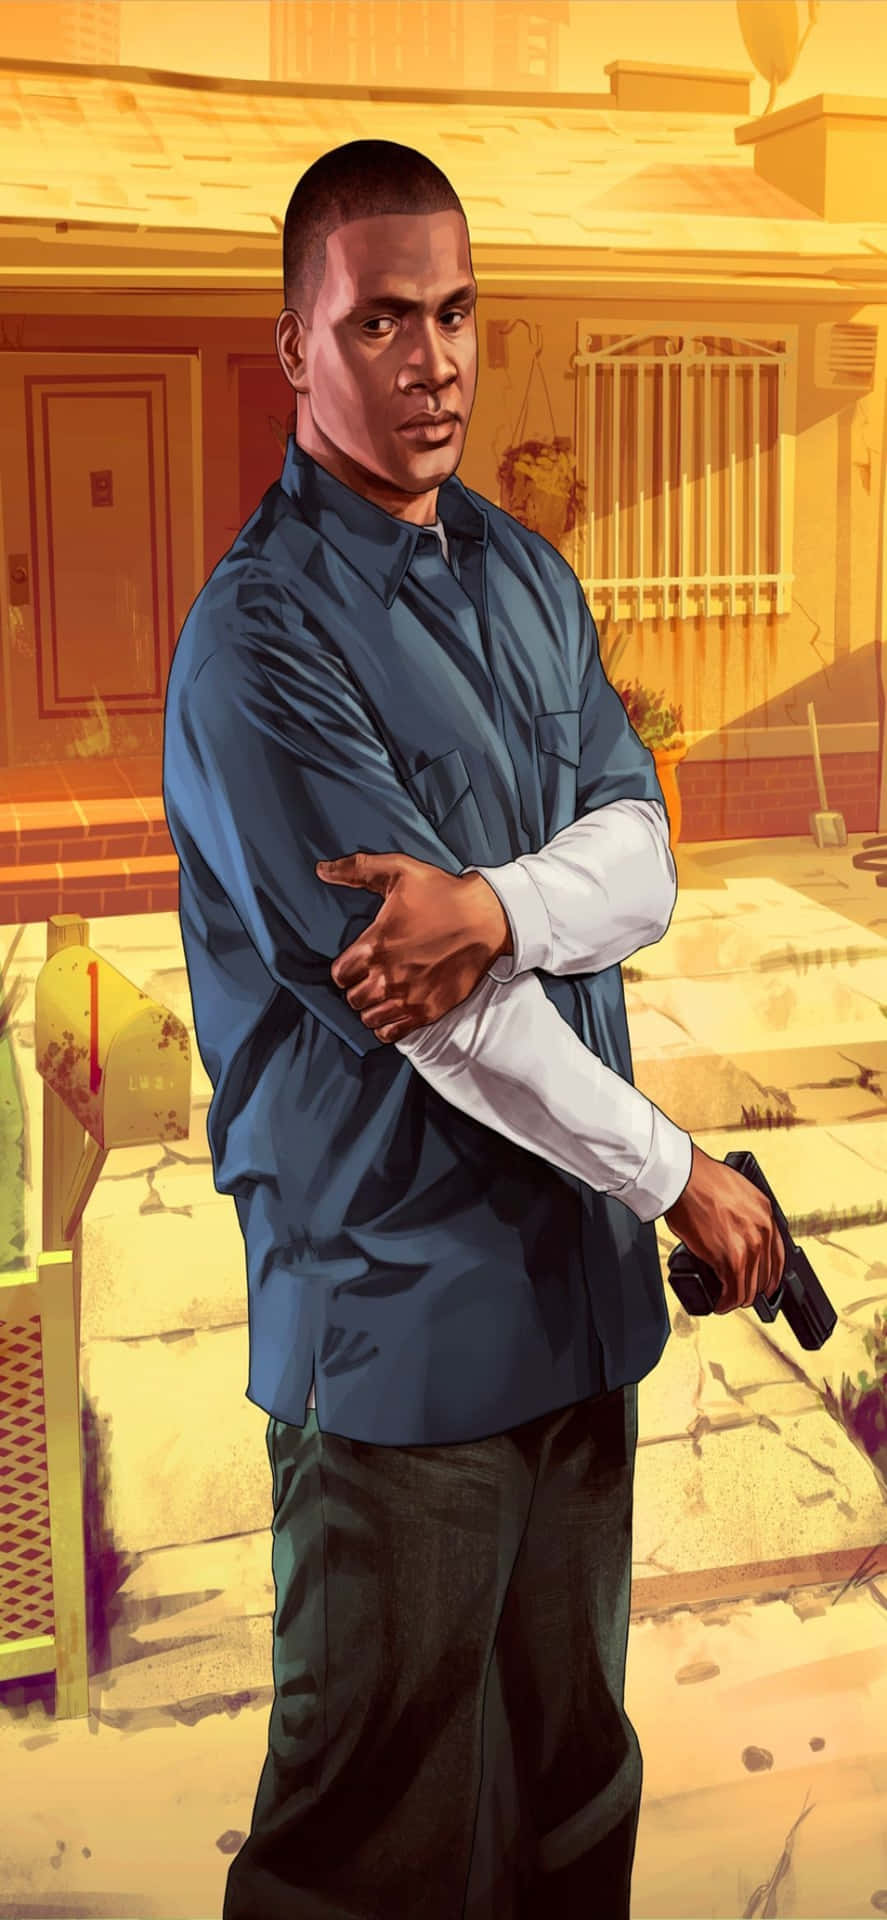 Iphone X Grand Theft Auto V Background Frank In Sleeve